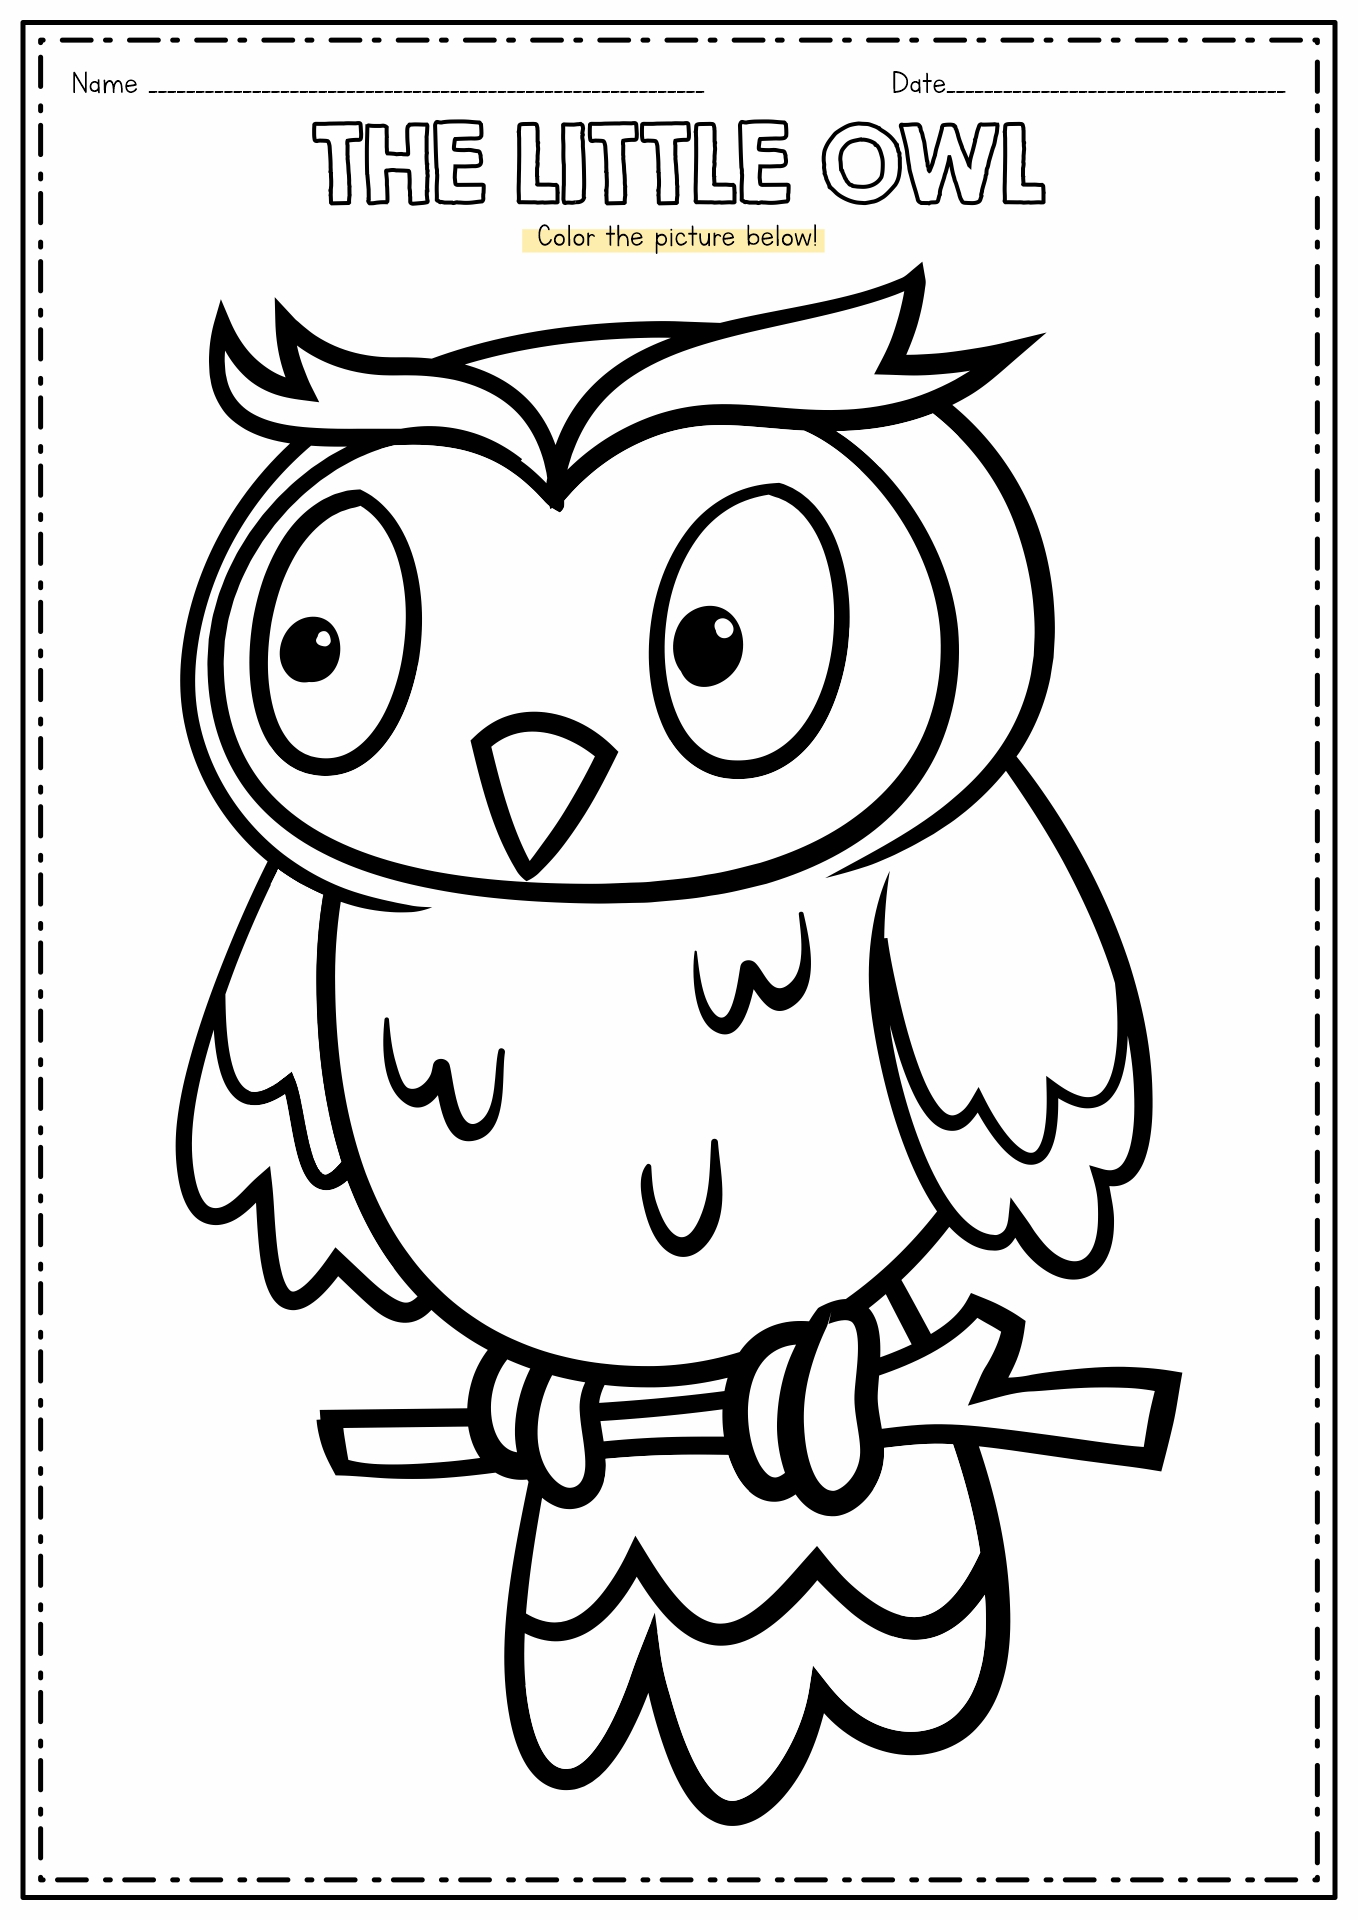 Owl Coloring Pages More Image